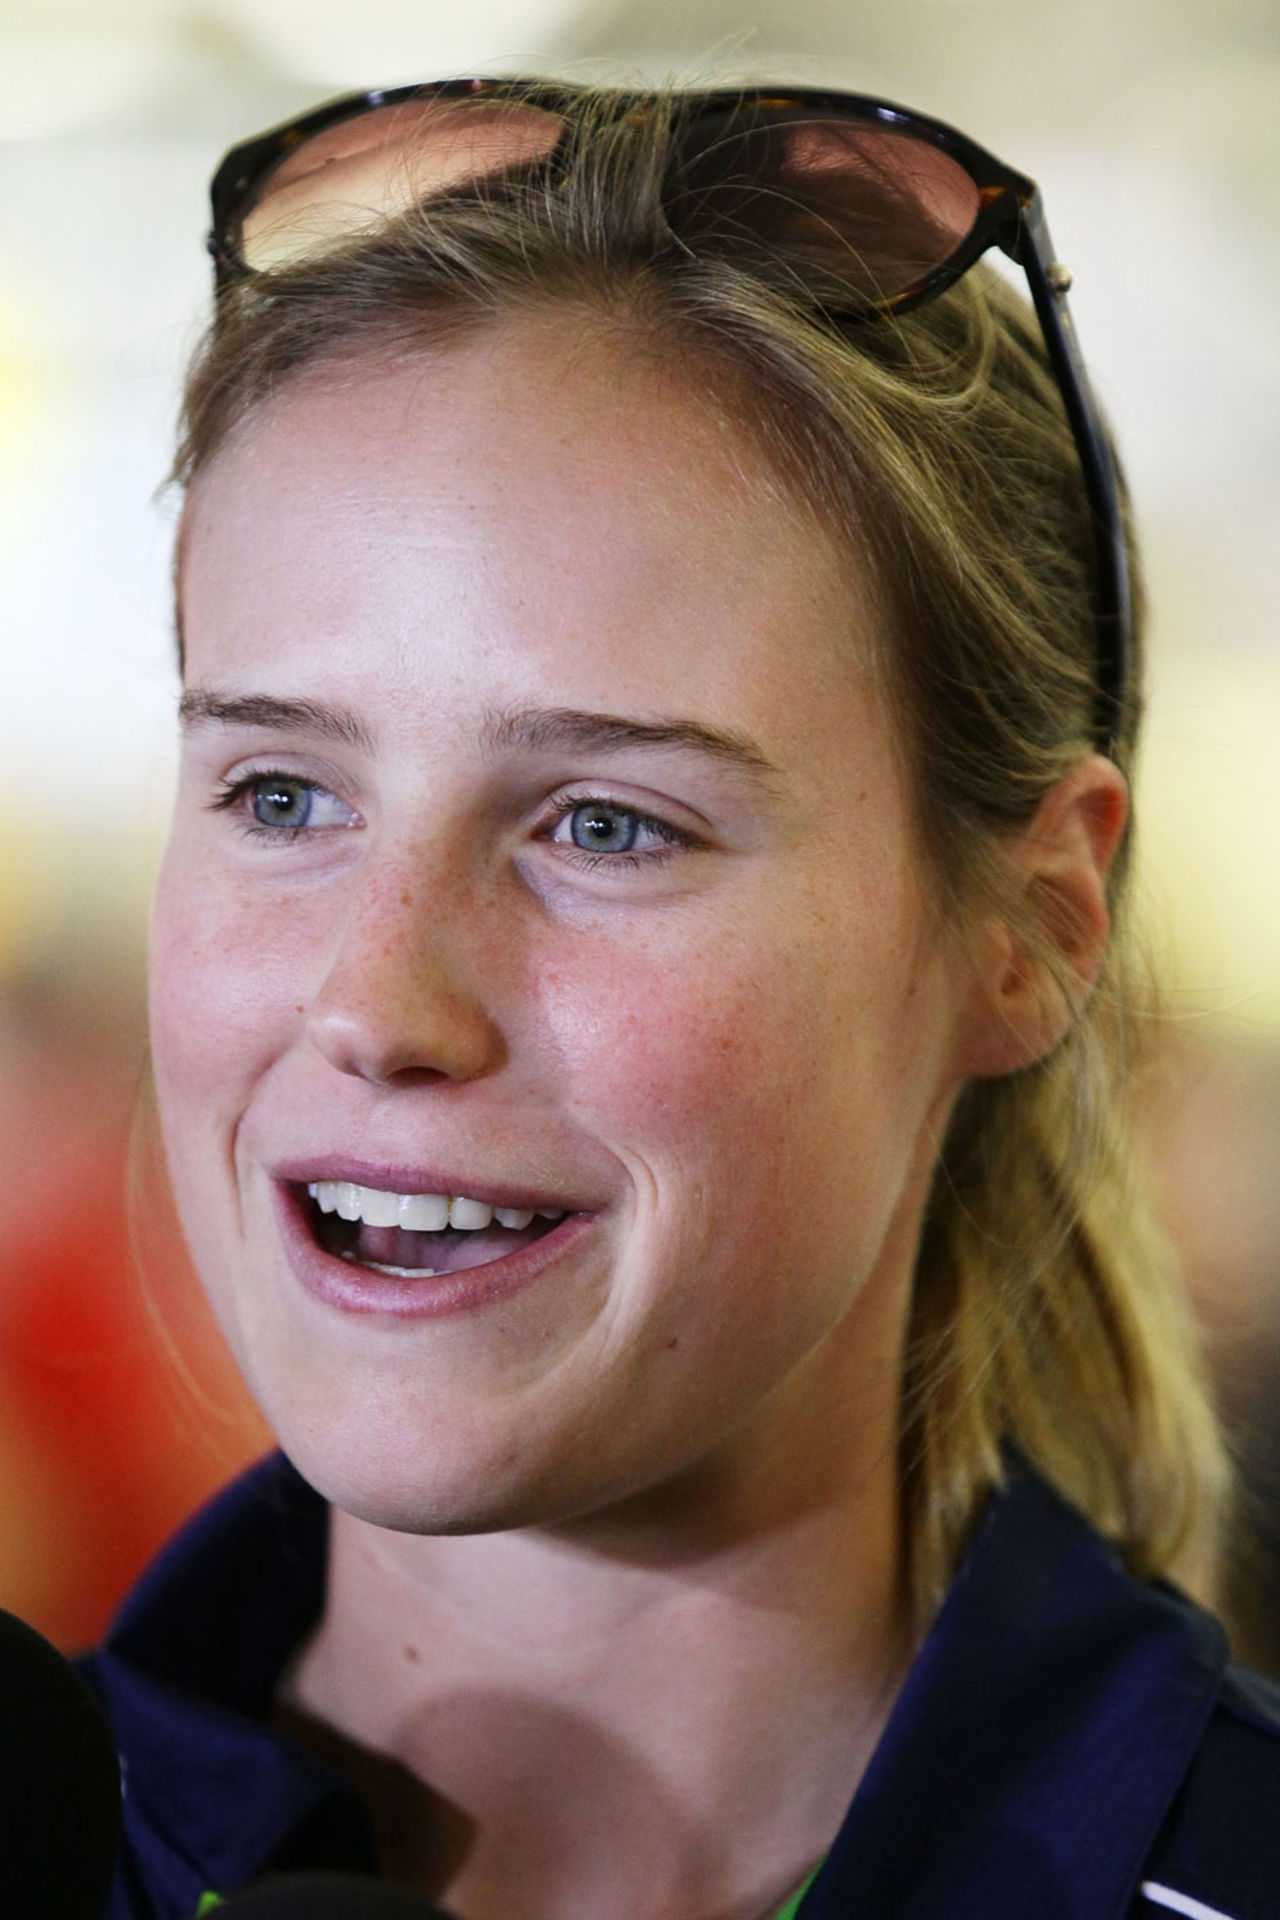 Australia's Ellyse Perry is all smiles after returning home from a victorious World Cup campaign, ICC Women's World Cup 2013, Sydney, February 21, 2013